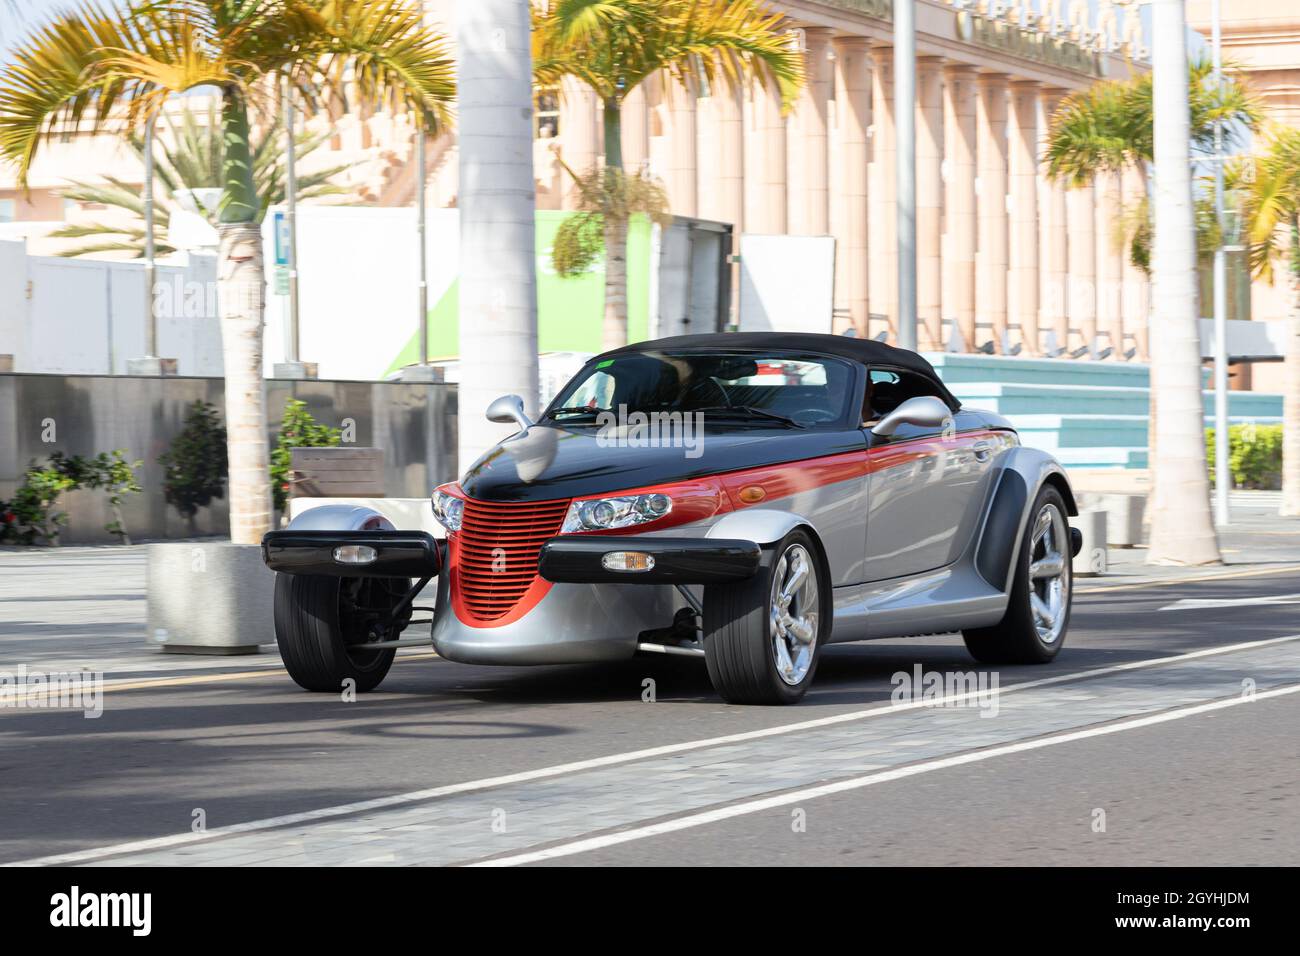 TENERIFE, SPAIN-OCTOBER 1, 2021: 1997 Plymouth Prowler (Chrysler Prowler) on the street Stock Photo